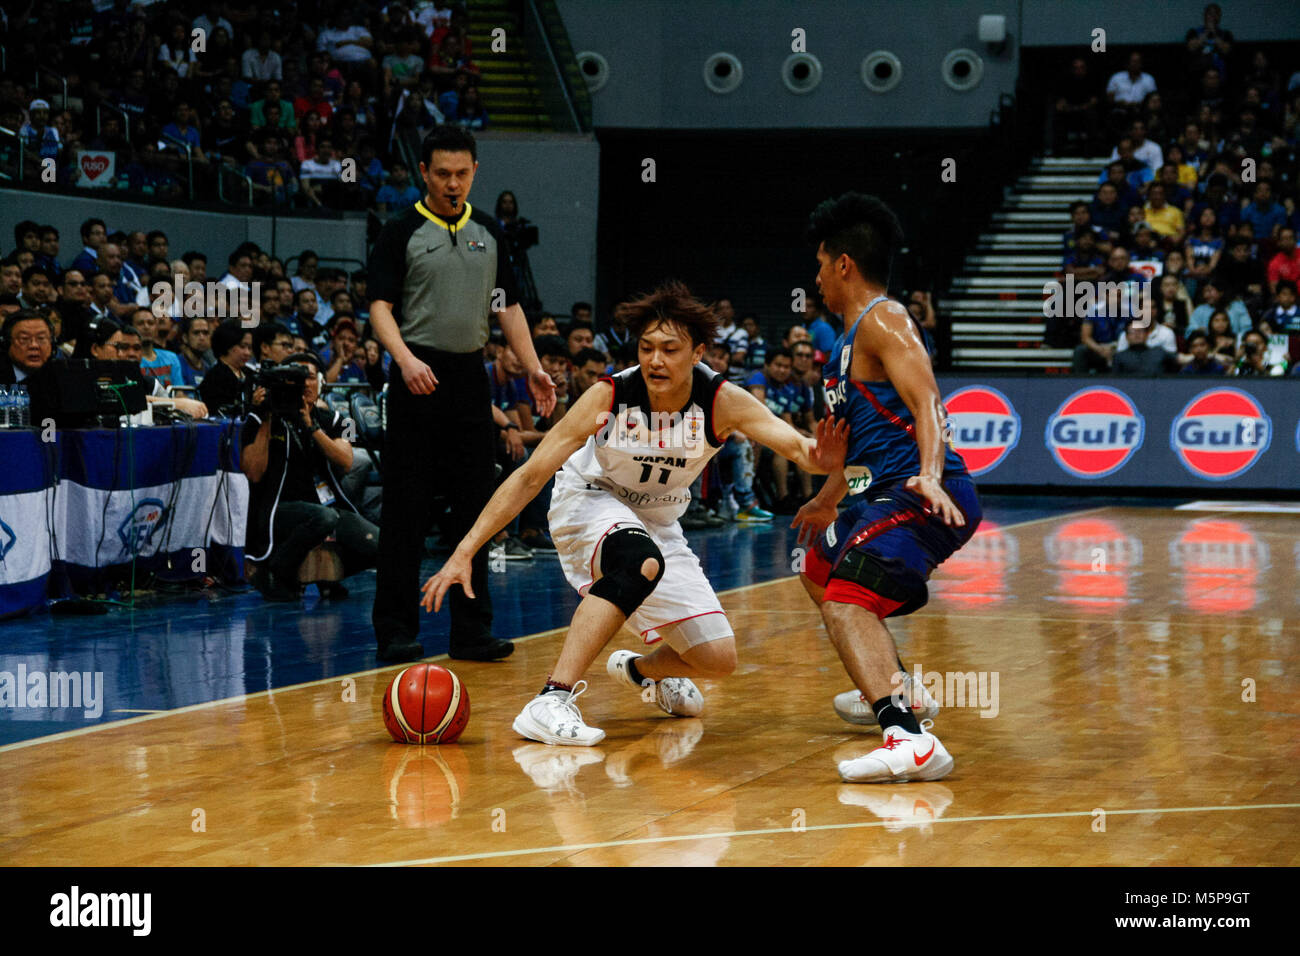 Philippines. 25th Feb, 2018. Naoki Uto (11) scrambles for the ball during the qualifying game at the MOA Arena. The Philippine and Japanese basketball team met at the hardcourt of the Mall of Asia Arena in Pasay City, for the FIBA World Cup 2019 Asian Qualifiers. The Philippines won over Japan, 89-84. Credit: J Gerard Seguia/ZUMA Wire/Alamy Live News Stock Photo